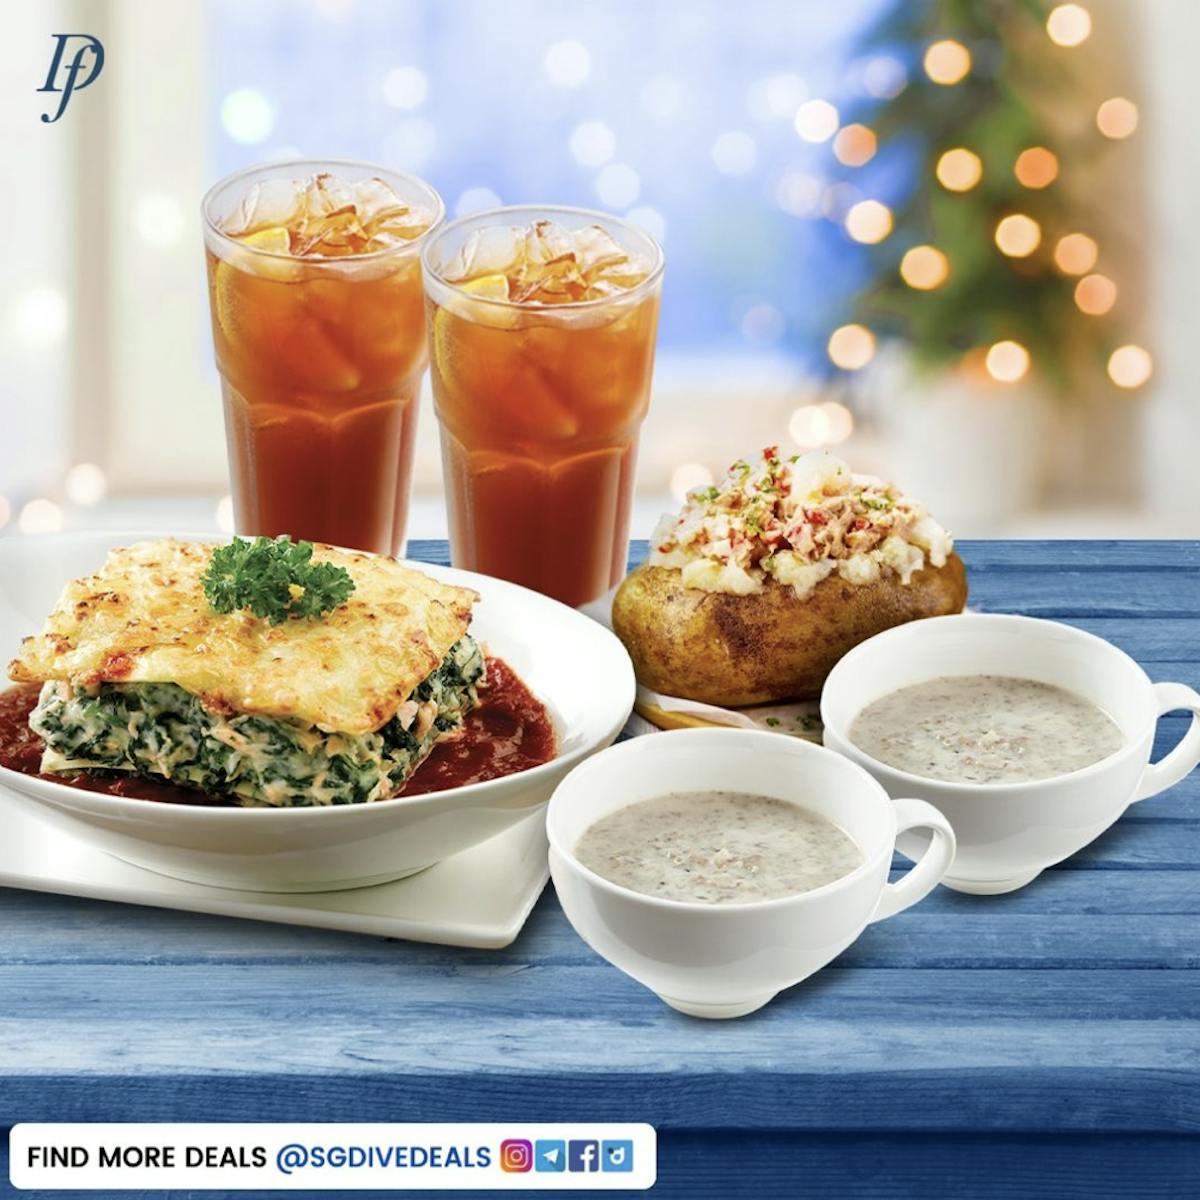 Delifrance Hearty Feast Promotion